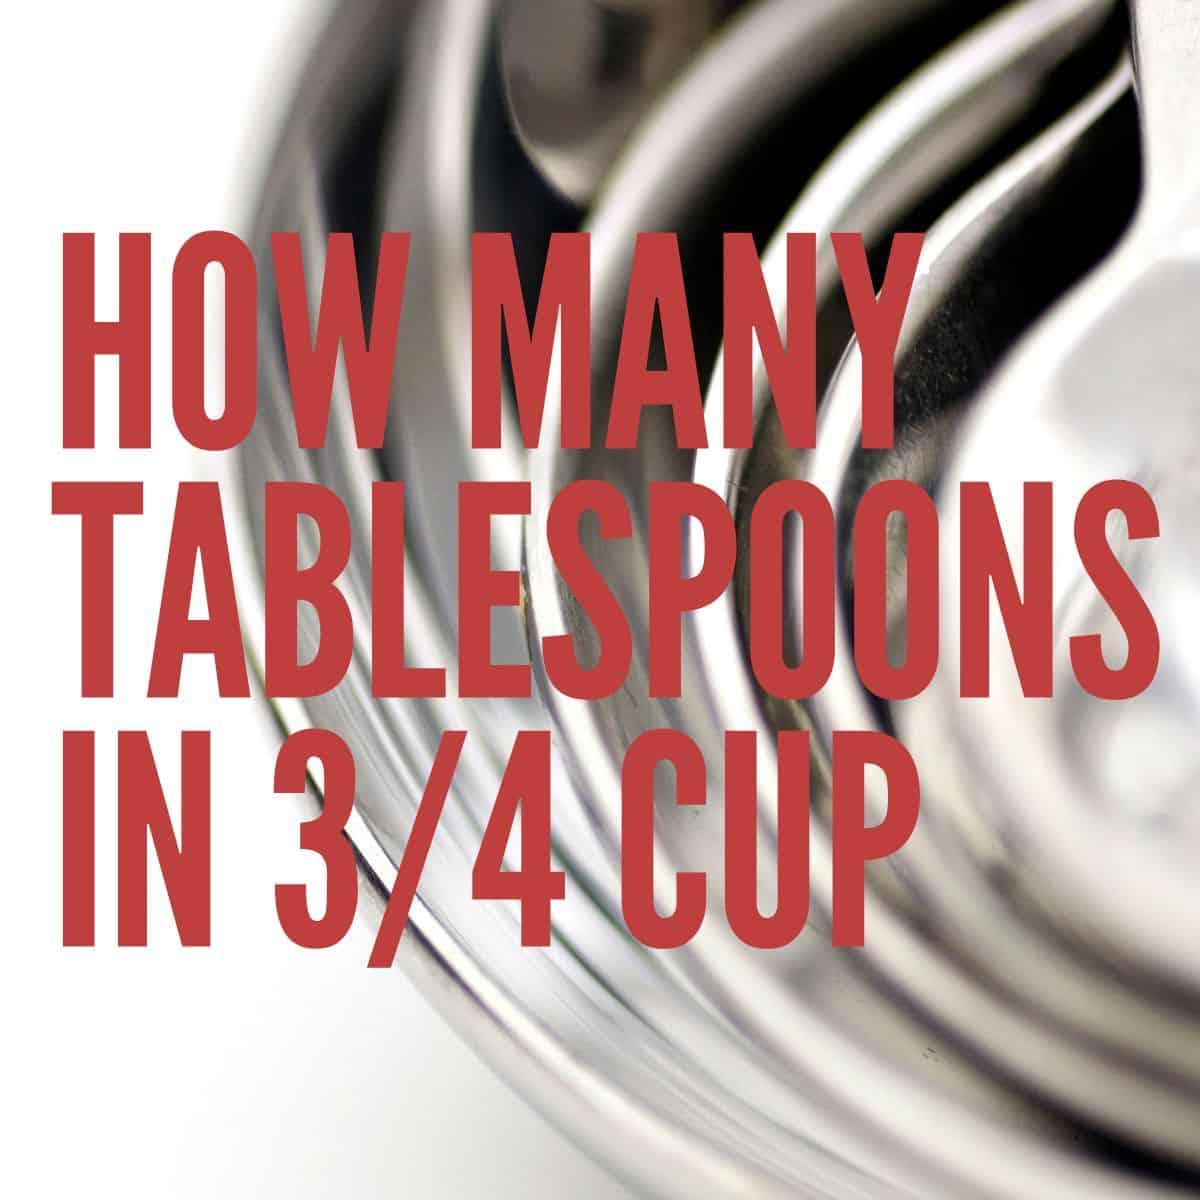 Tablespoons